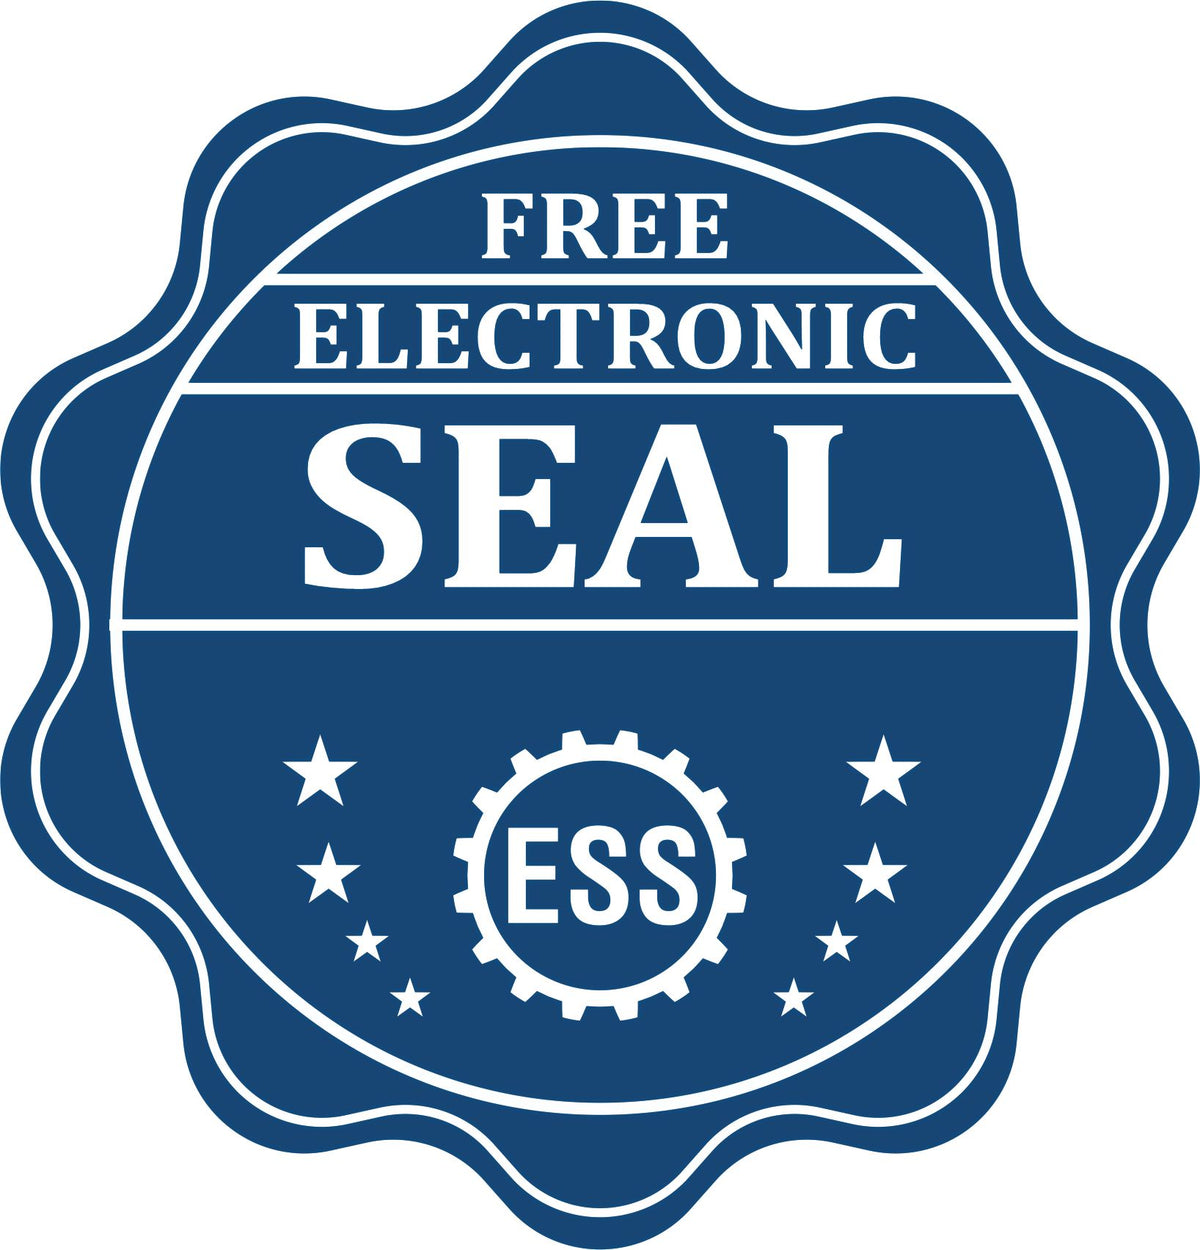 A badge showing a free electronic seal for the Heavy Duty Cast Iron Illinois Geologist Seal Embosser with stars and the ESS gear on the emblem.